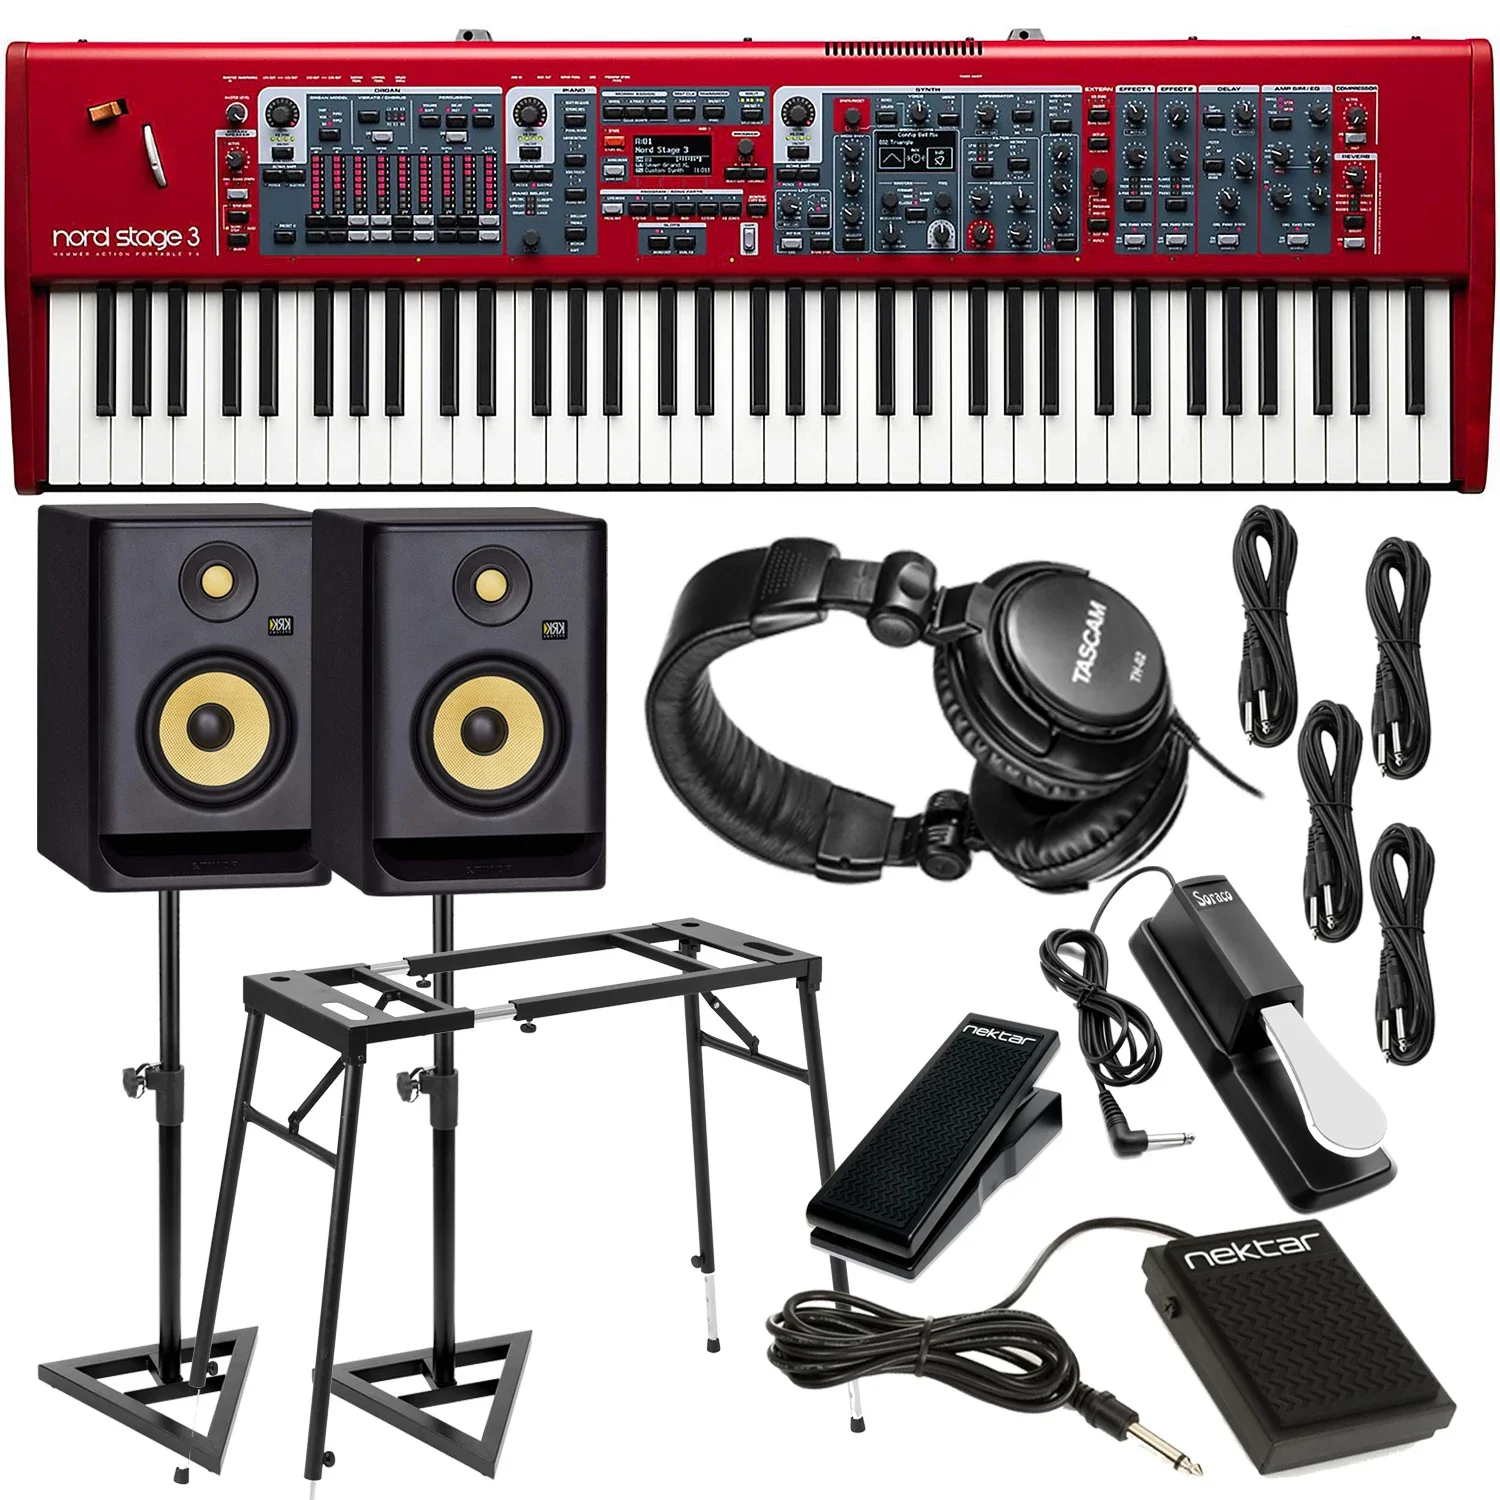 

SUMMER SALES DISCOUNT ON Best Sales For ORIGINAL Nord Stages 3 88 Piano Fully Weighted Hammer Action Digital Keyboard